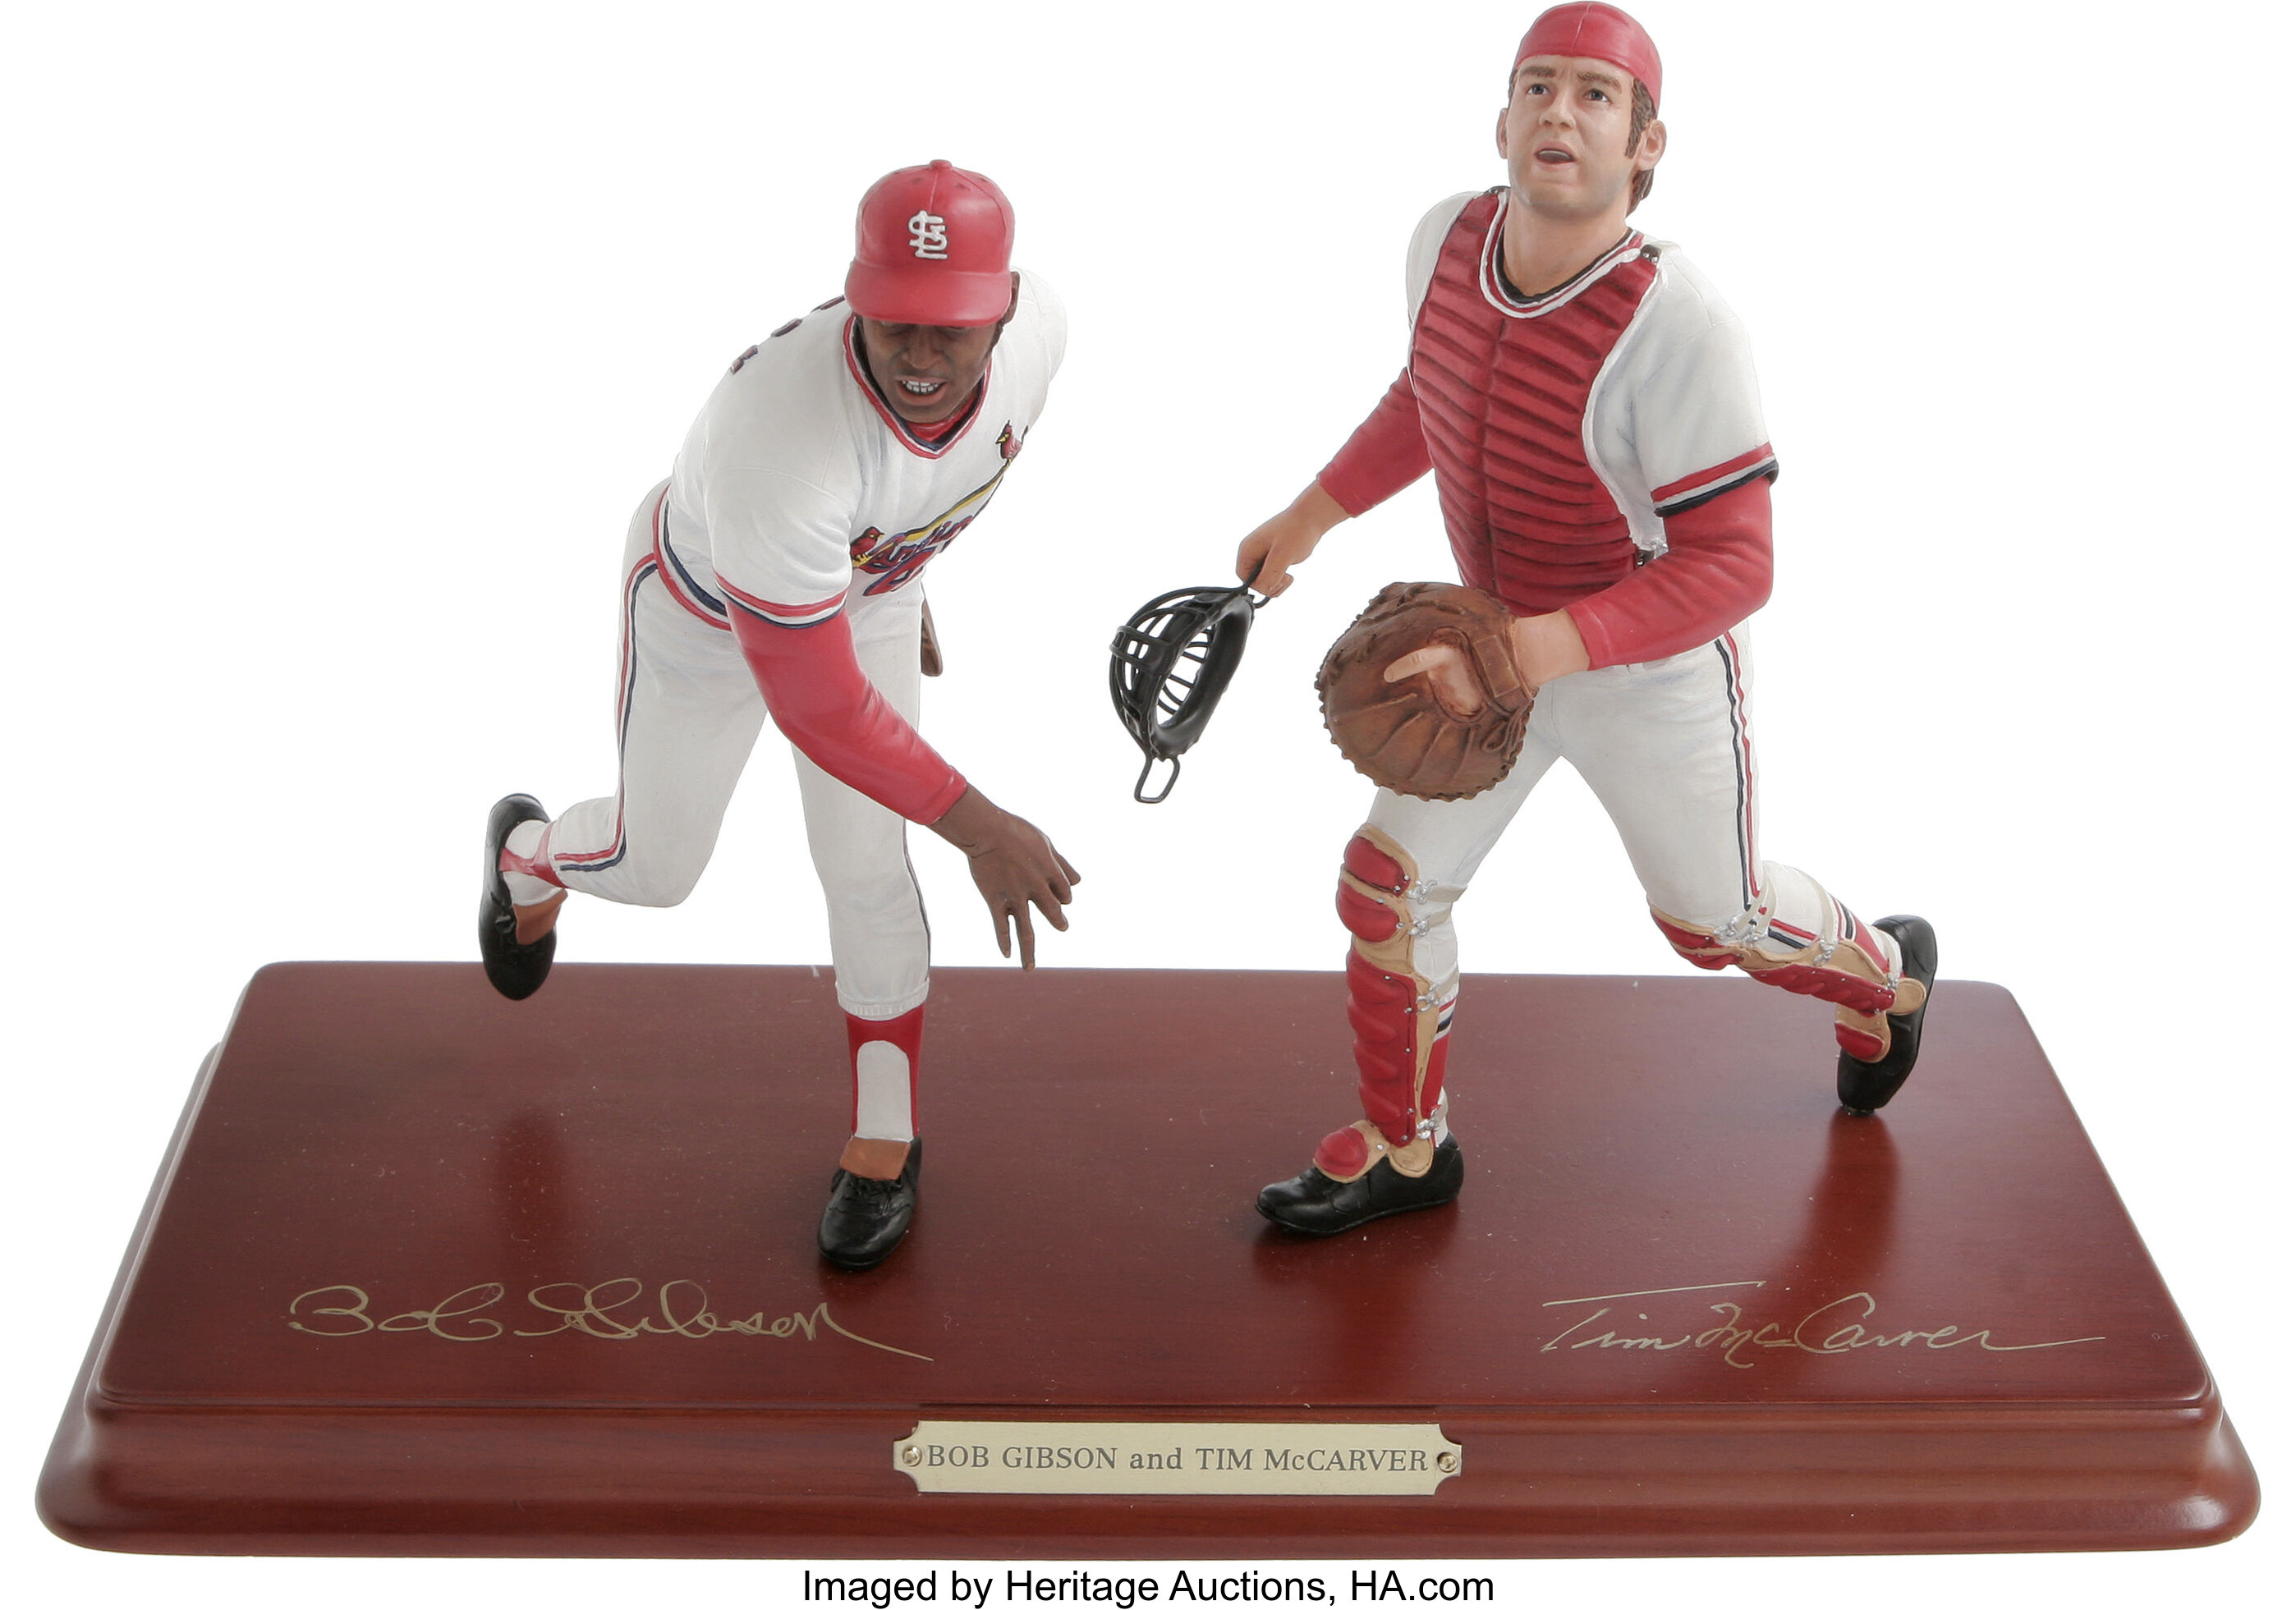 When did Tim McCarver and Bob Gibson play together for the Cardinals?